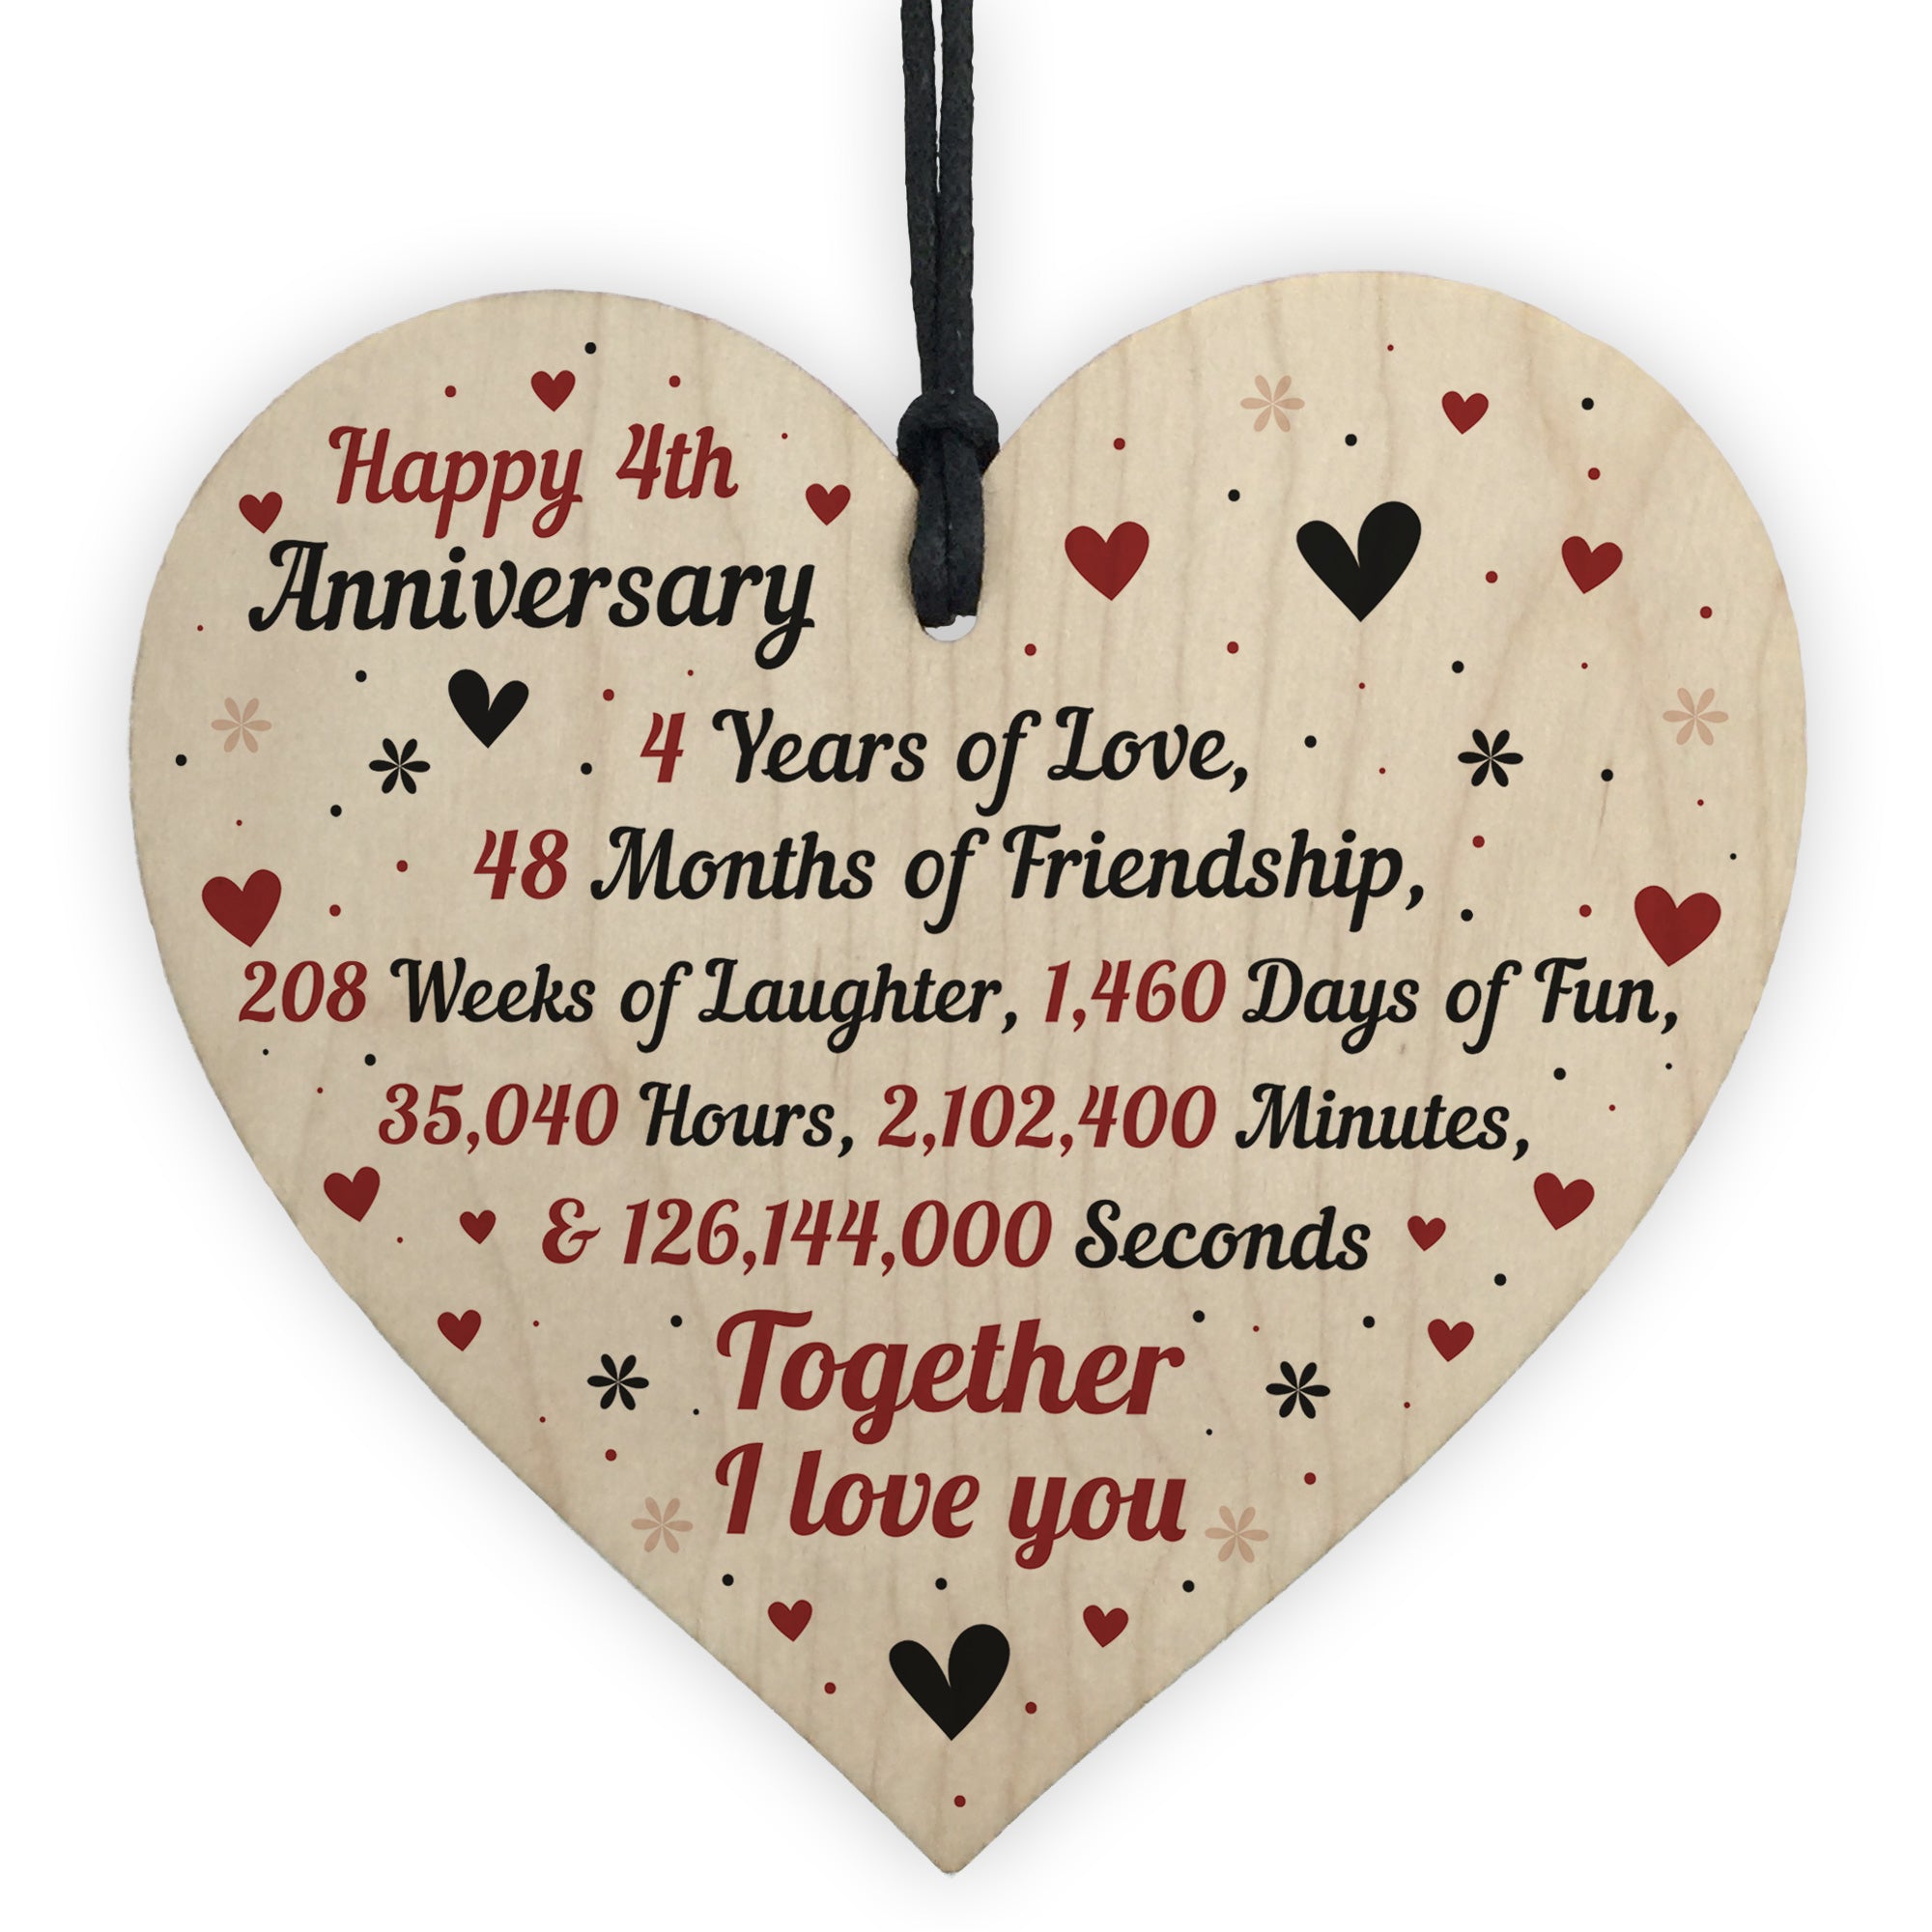 4 Year Anniversary Gift Ideas | 4th year anniversary gifts, 4th wedding  anniversary gifts for him, Anniversary gifts